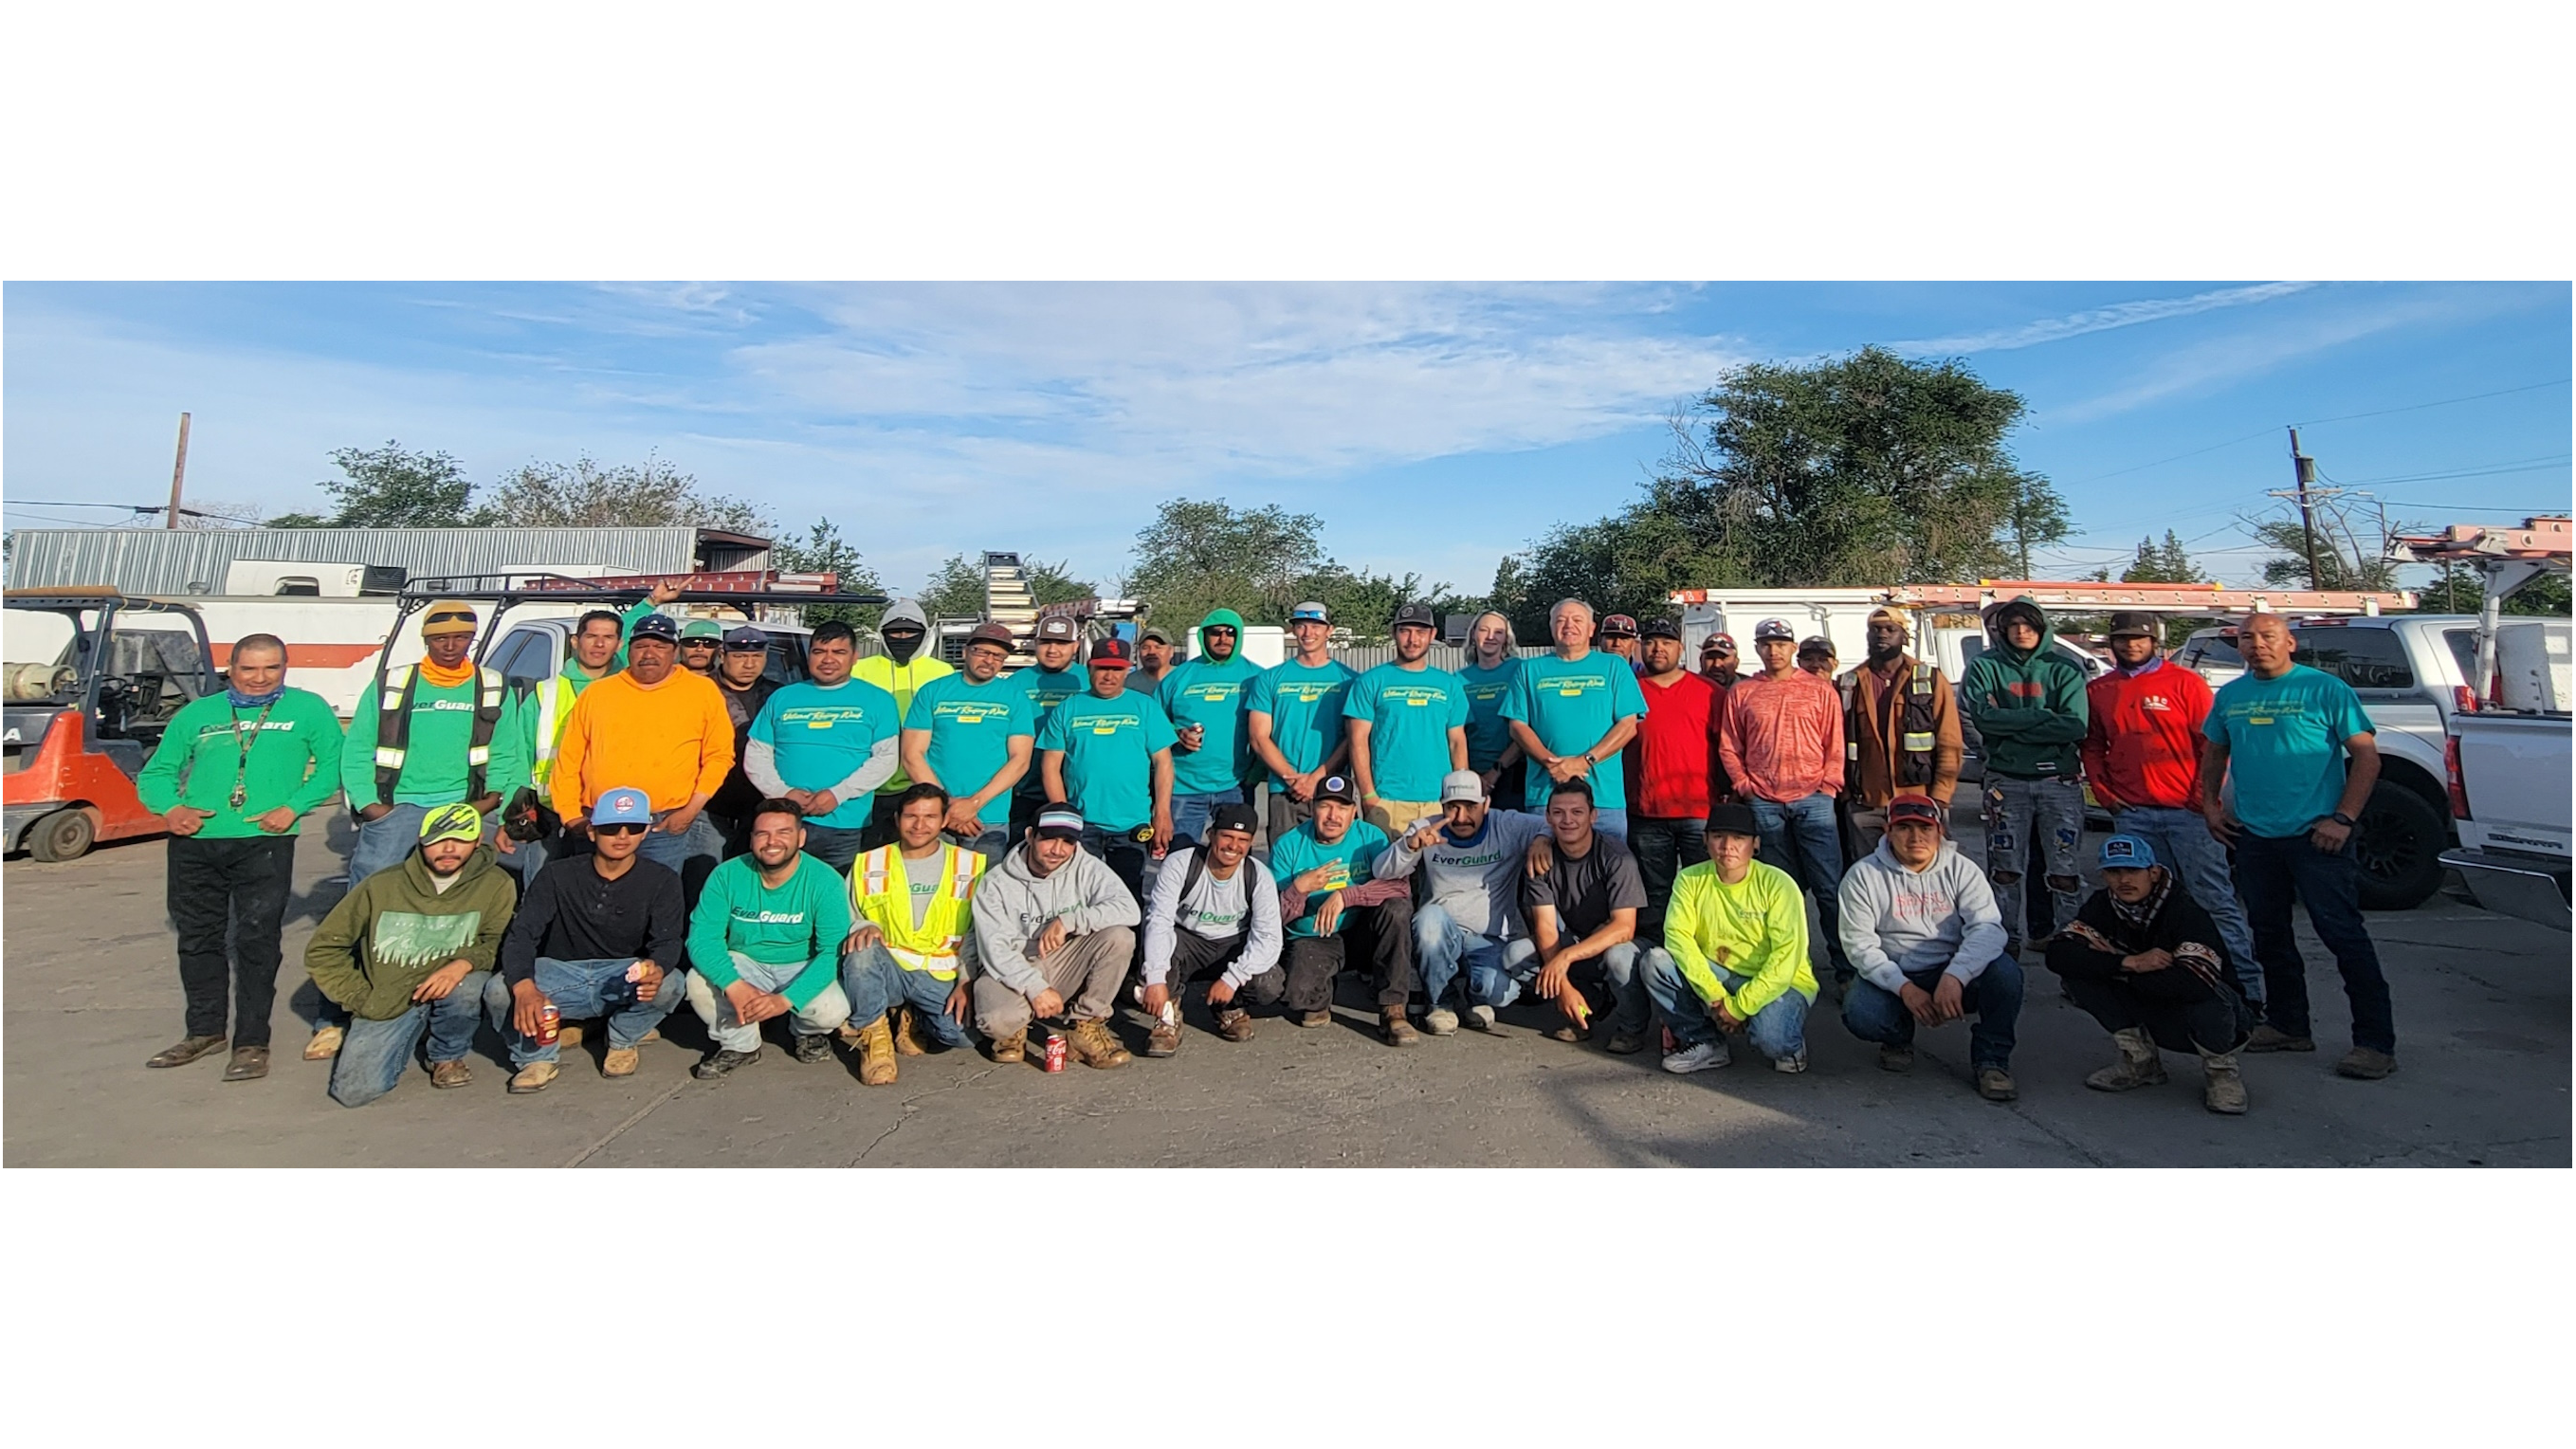 Roofing and Solar EverGuard Roofing & Solar Celebrates Its 22nd Anniversary